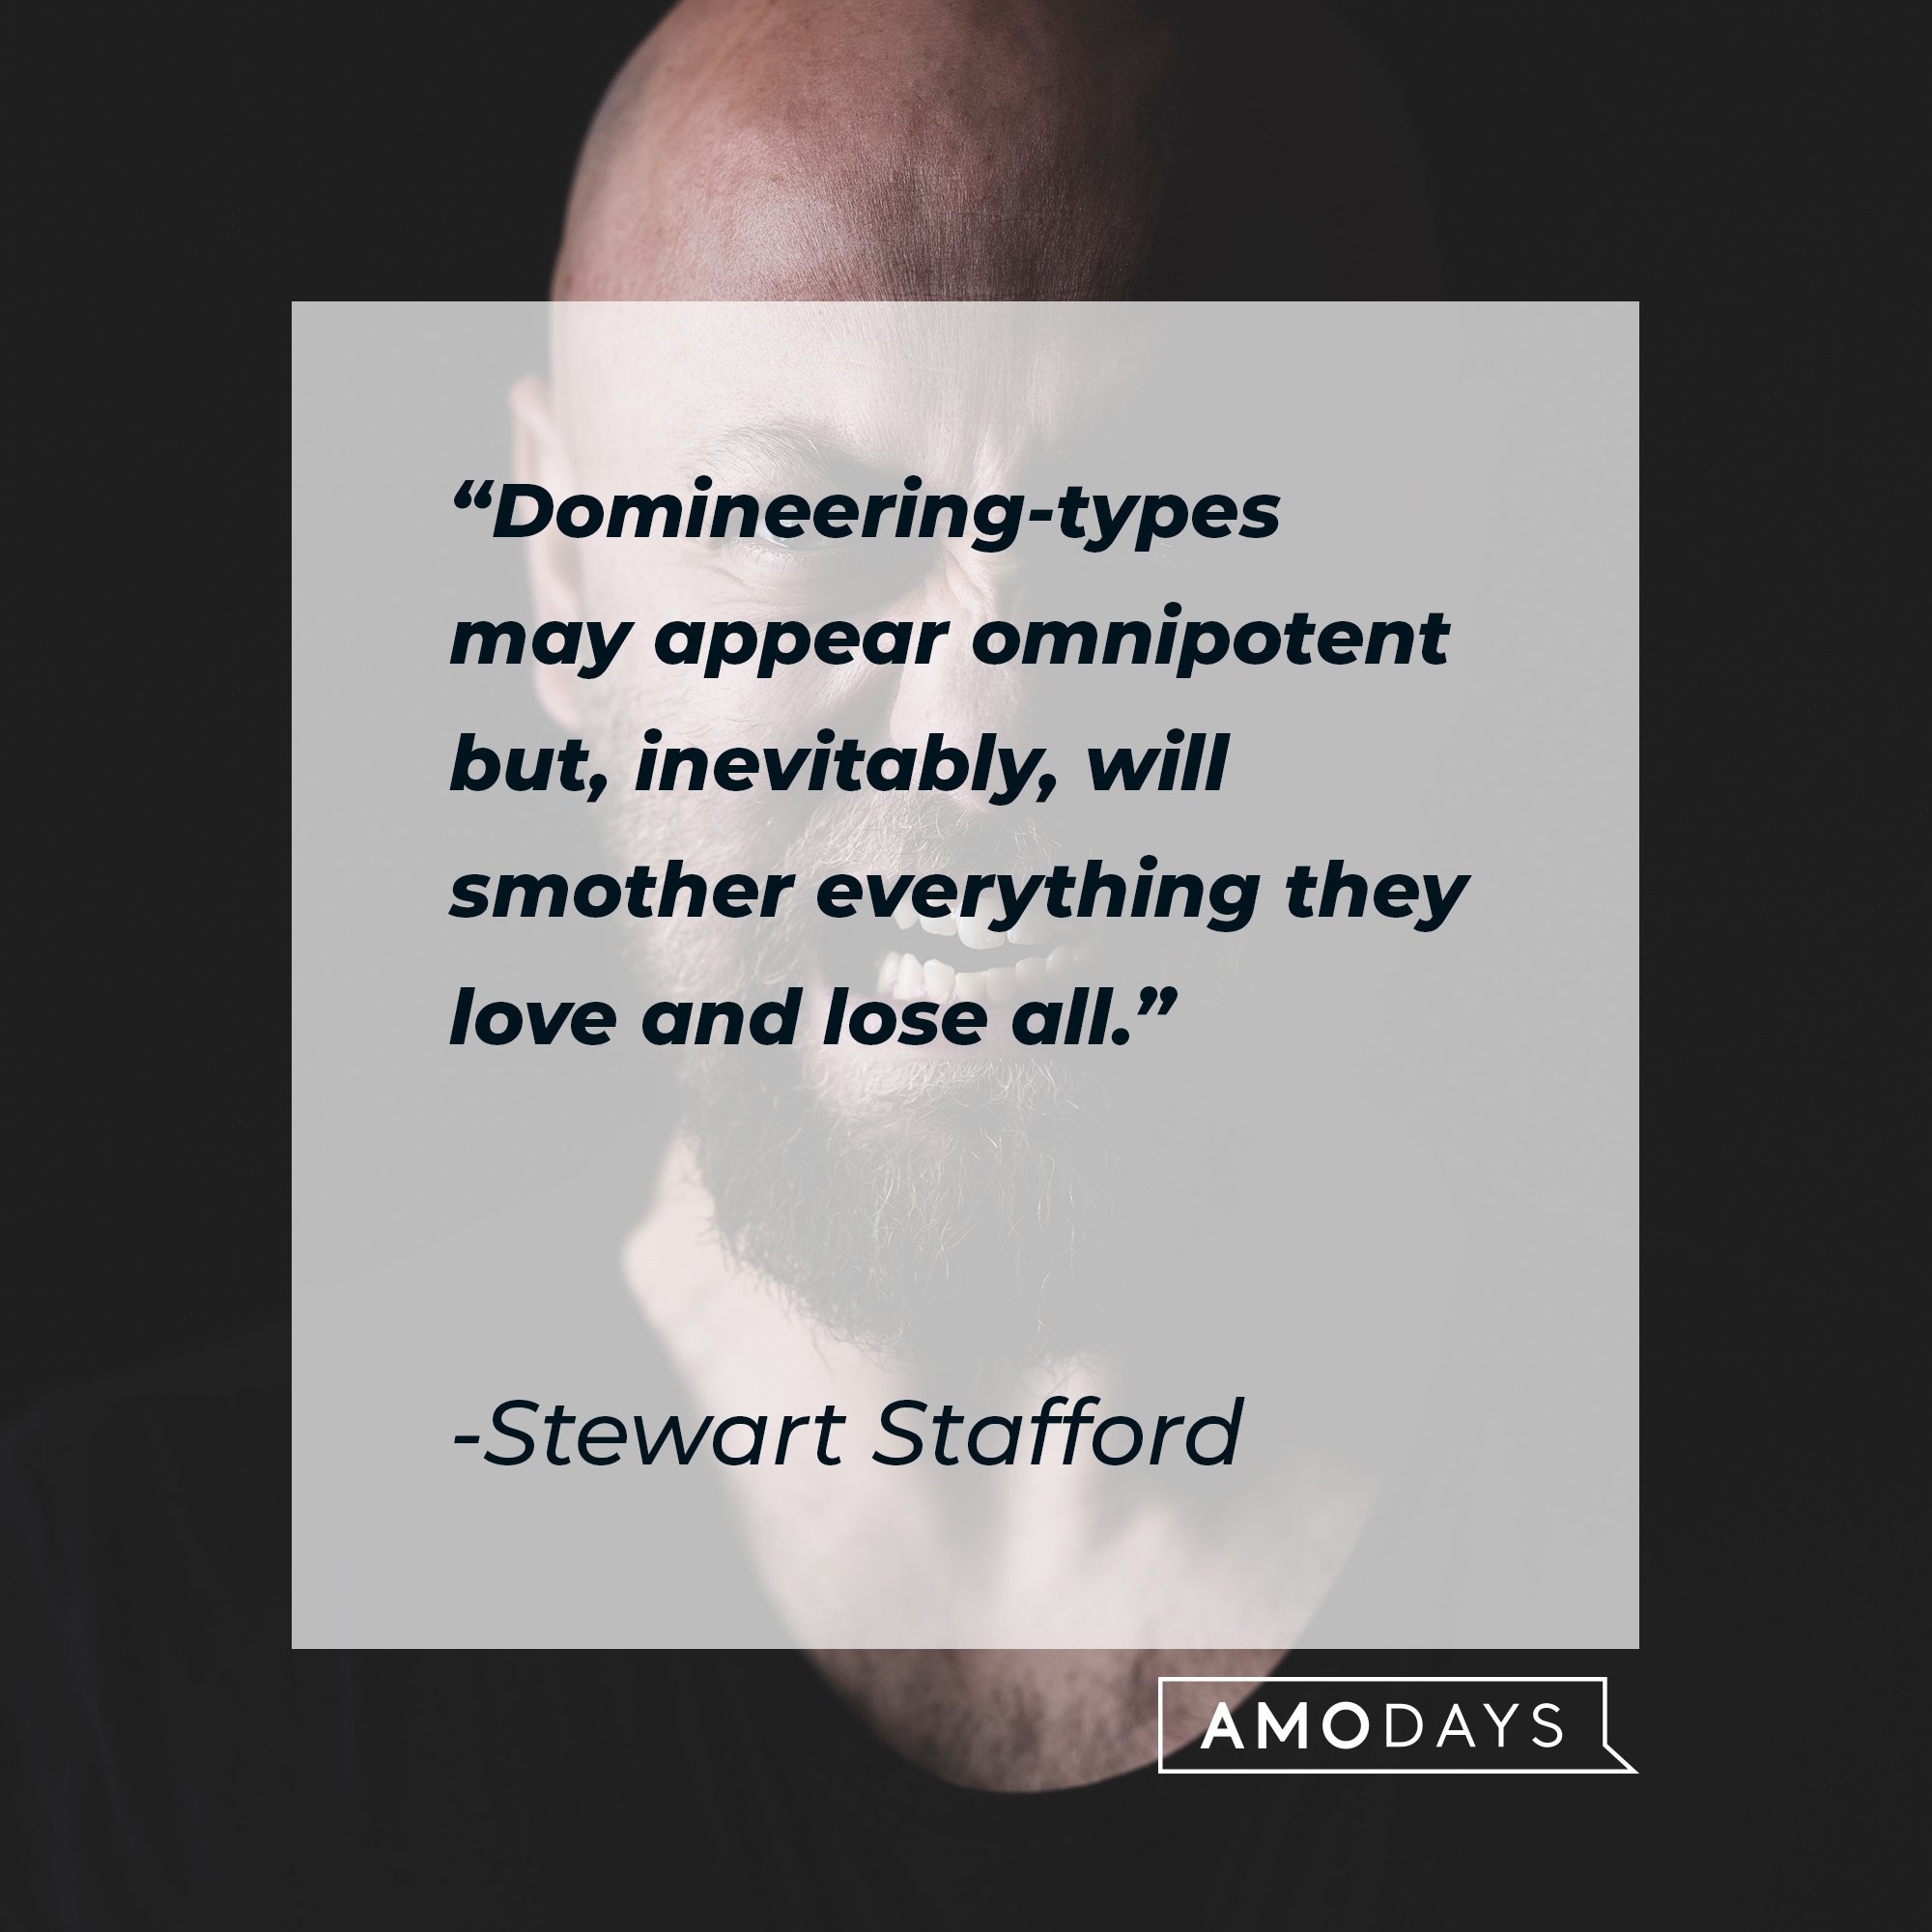 Stewart Stafford's quote: "Domineering-types may appear omnipotent but, inevitably, will smother everything they love and lose all." | Image: AmoDays